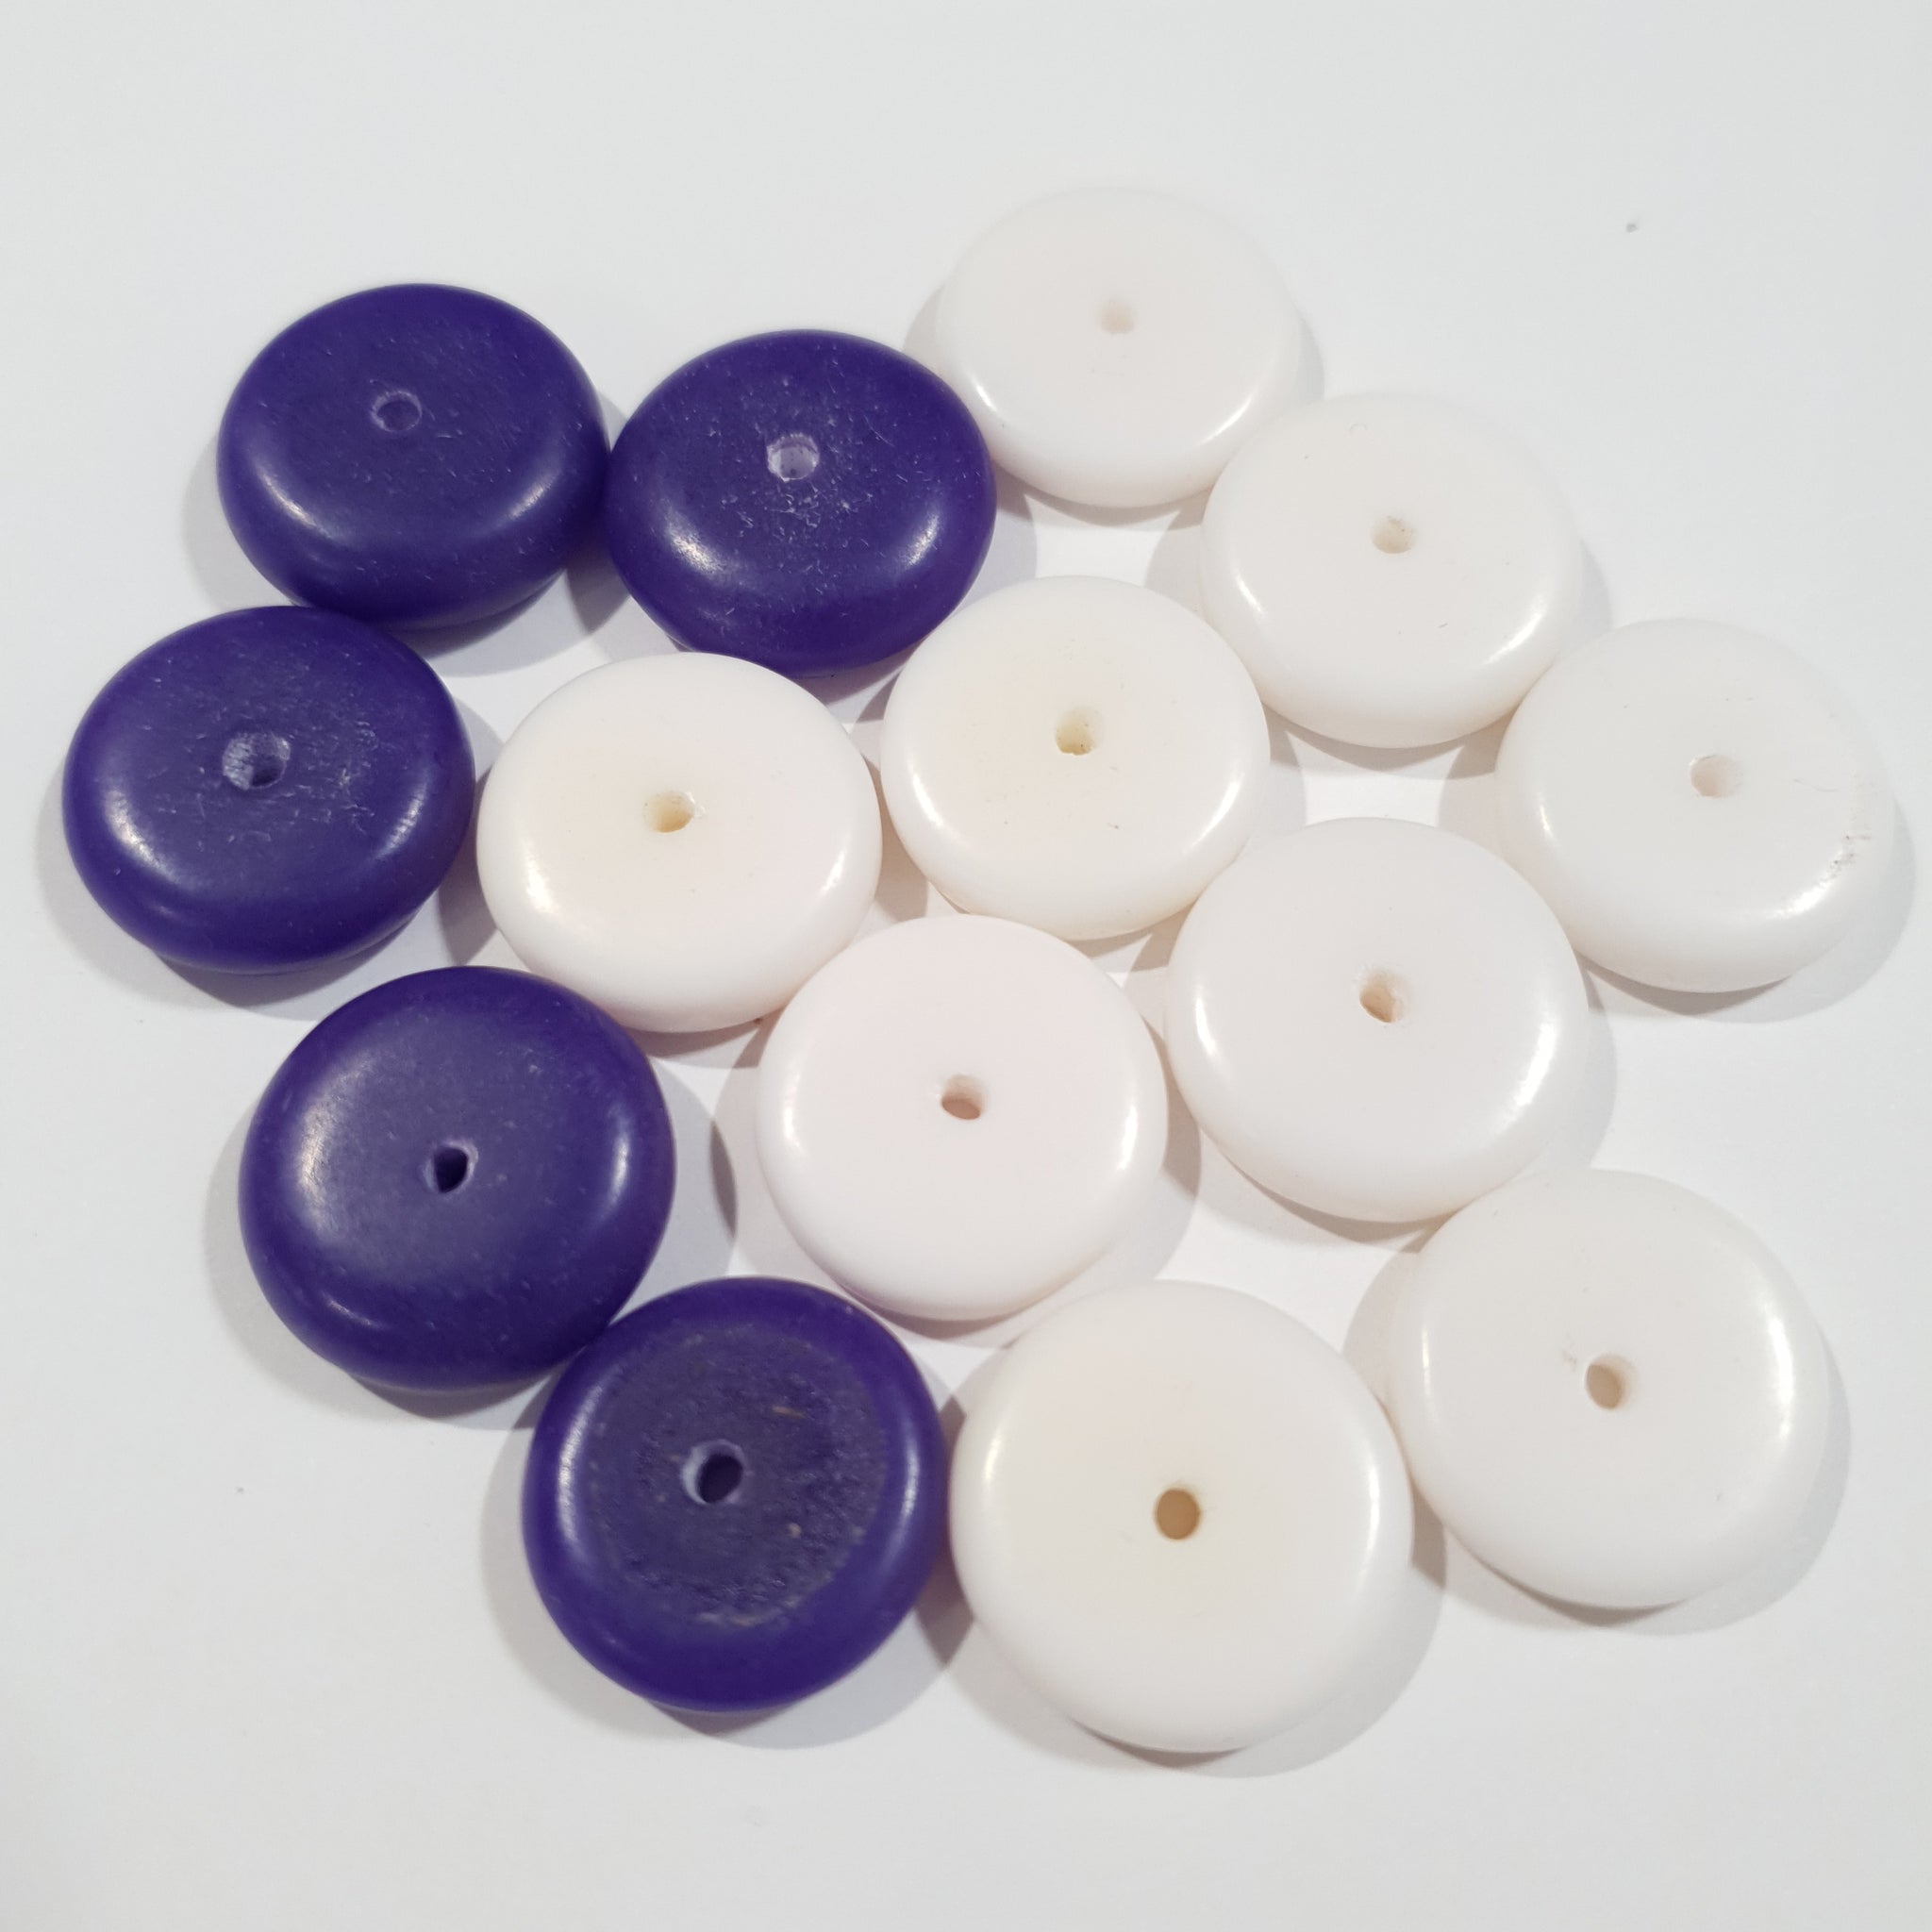 Resin, Rondelle, Mix, Purple/white, 6x18mm (14pcs - only 1 packet available!)